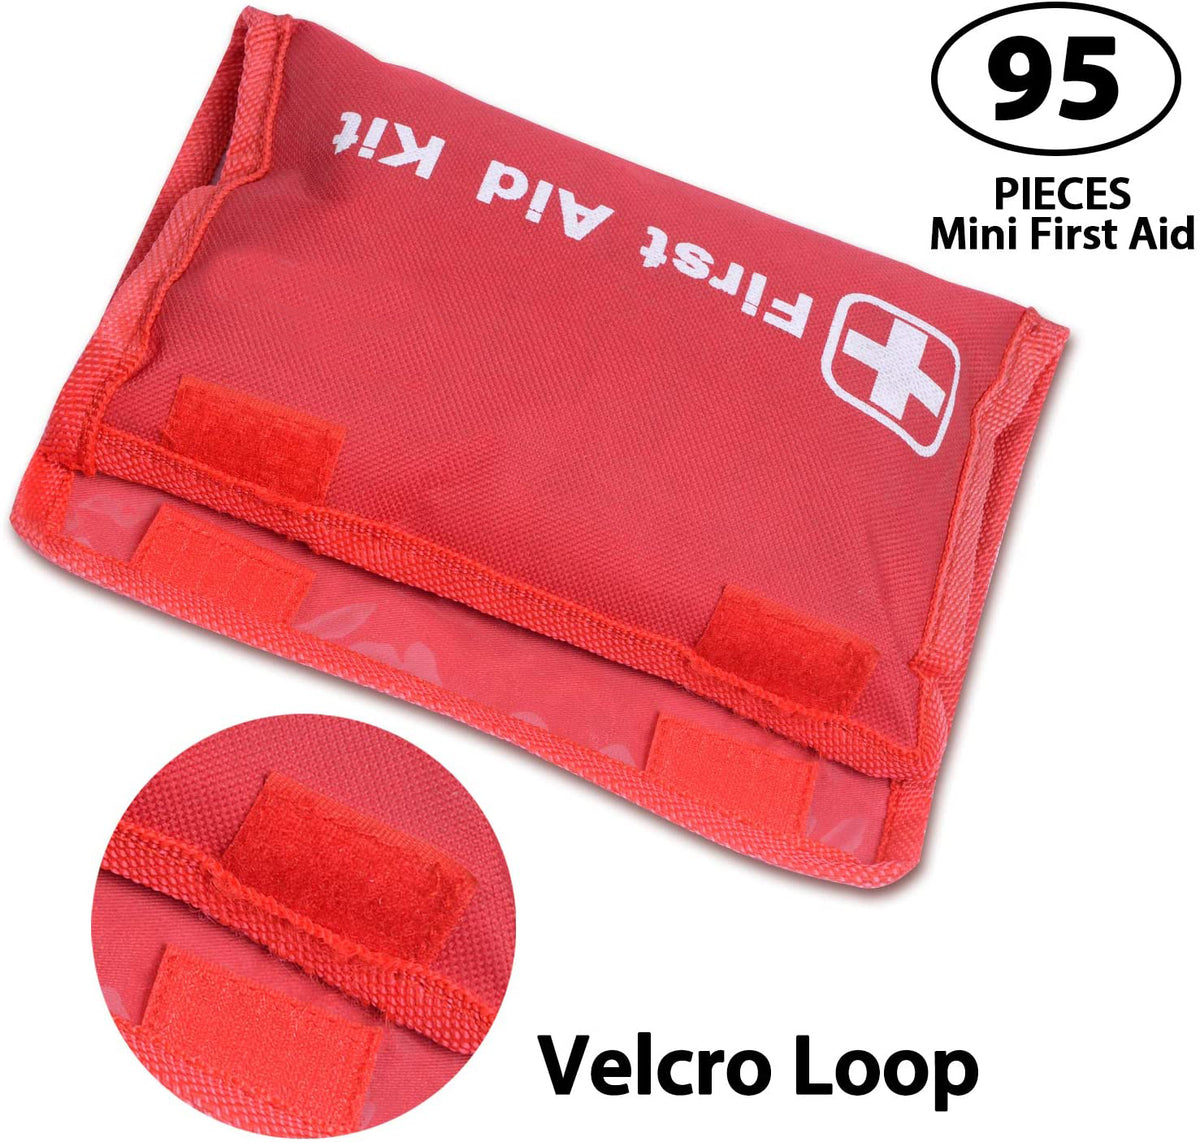 Mini First Aid Emergency Kit 95 PC for Home, Hiking, Travel & Outdoors